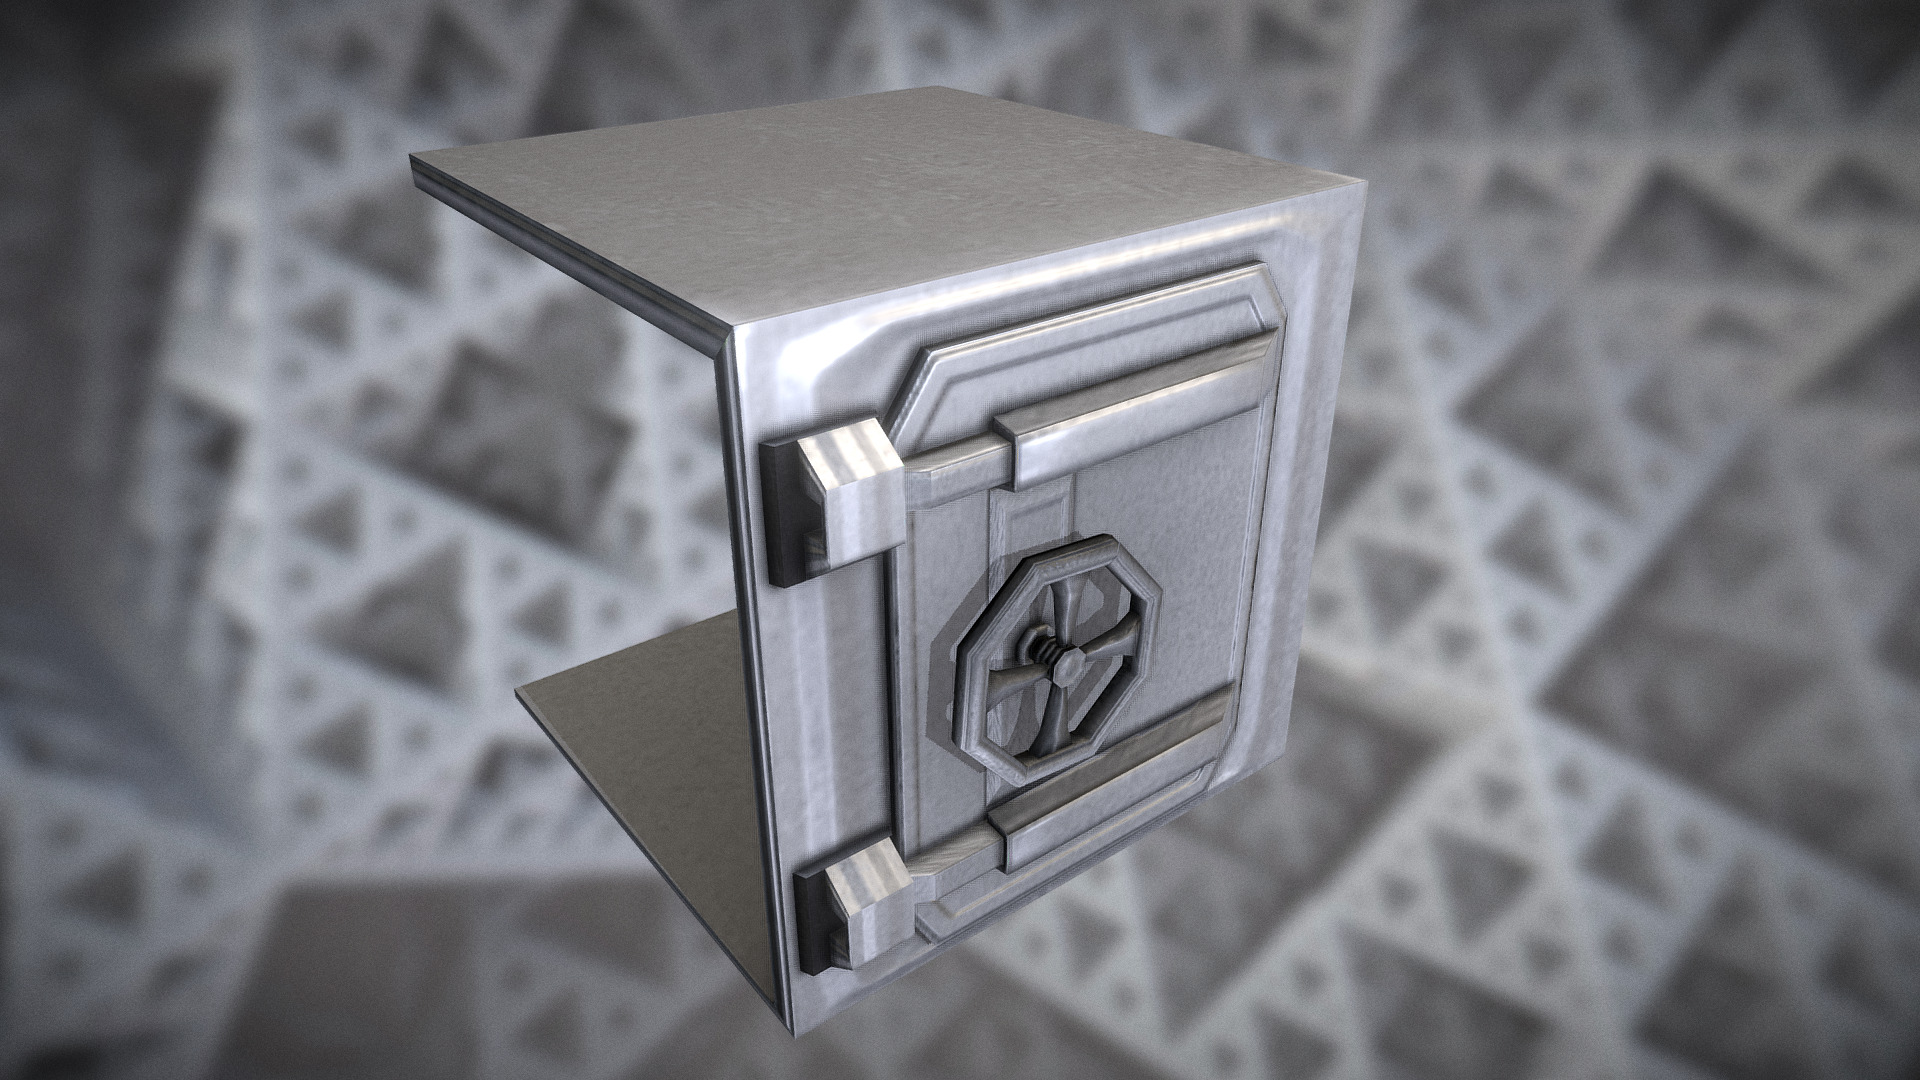 3D model Massive Sci-Fi Door Animated - This is a 3D model of the Massive Sci-Fi Door Animated. The 3D model is about a silver metal box.